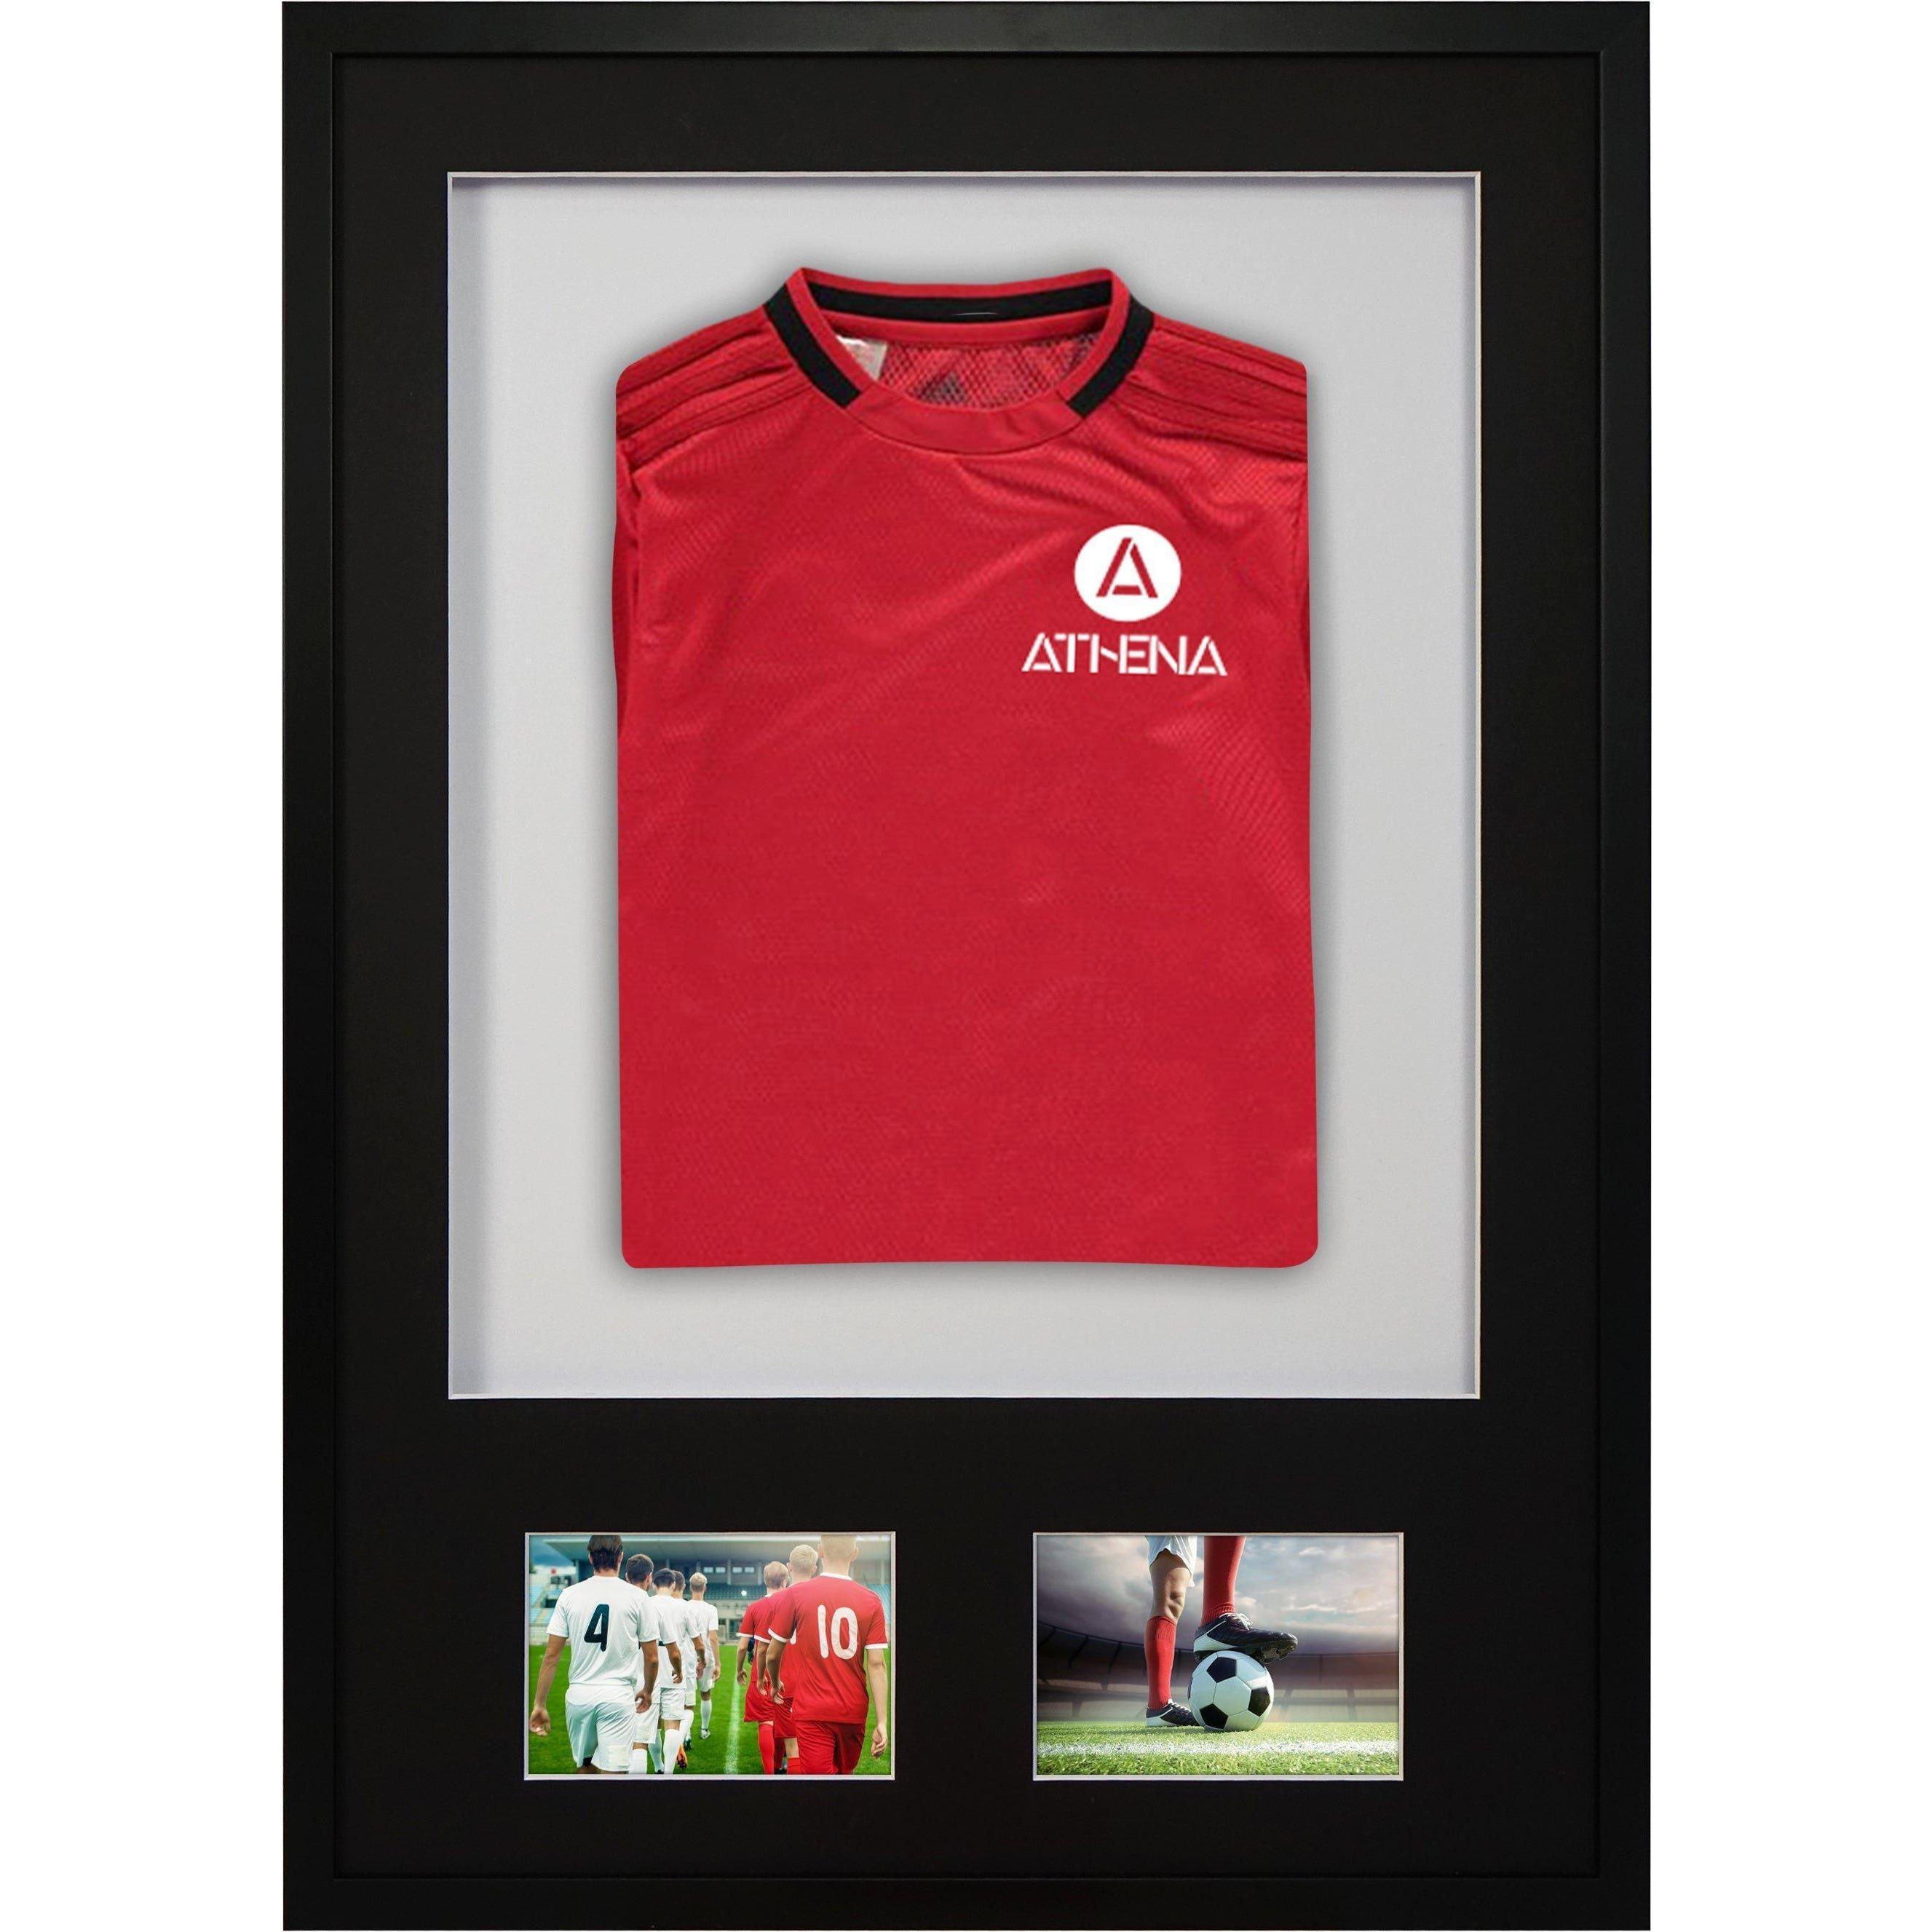 Athena 3D + Double Aperture Mounted Sports Shirt Display Frame with Black Frame and Black Mount 50 x 70cm